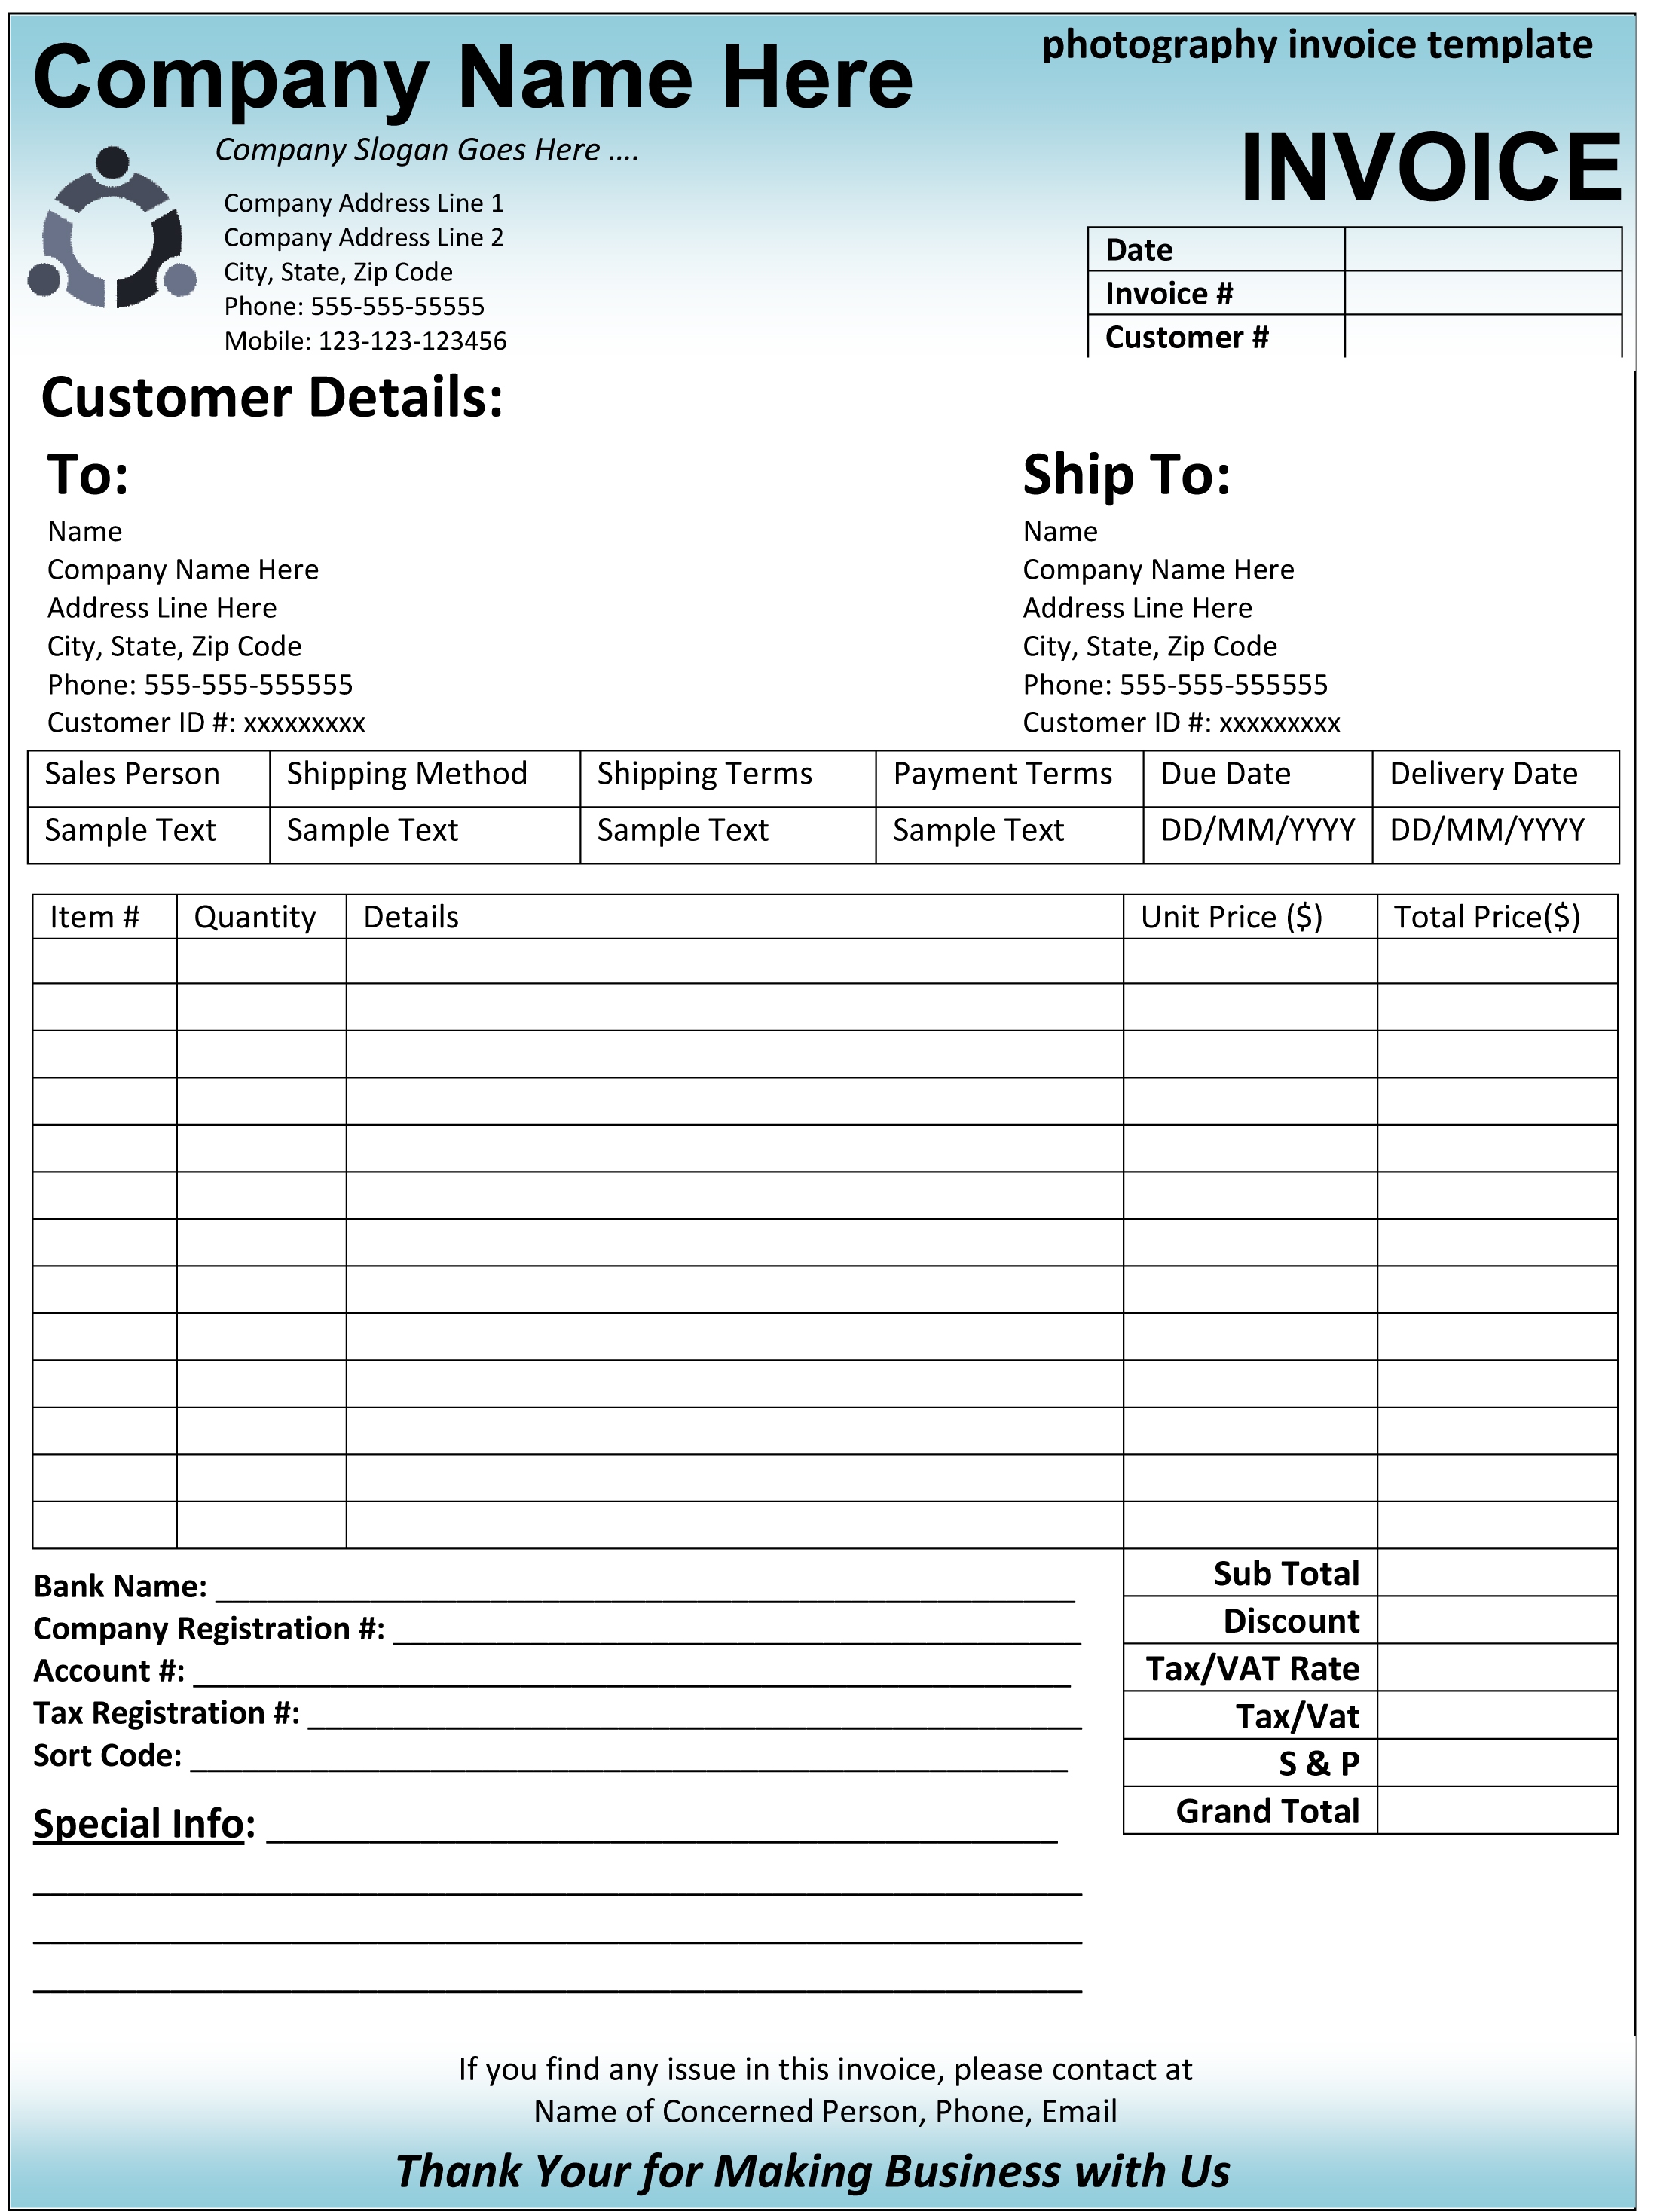 Photography Invoice Template Word Invoice Example